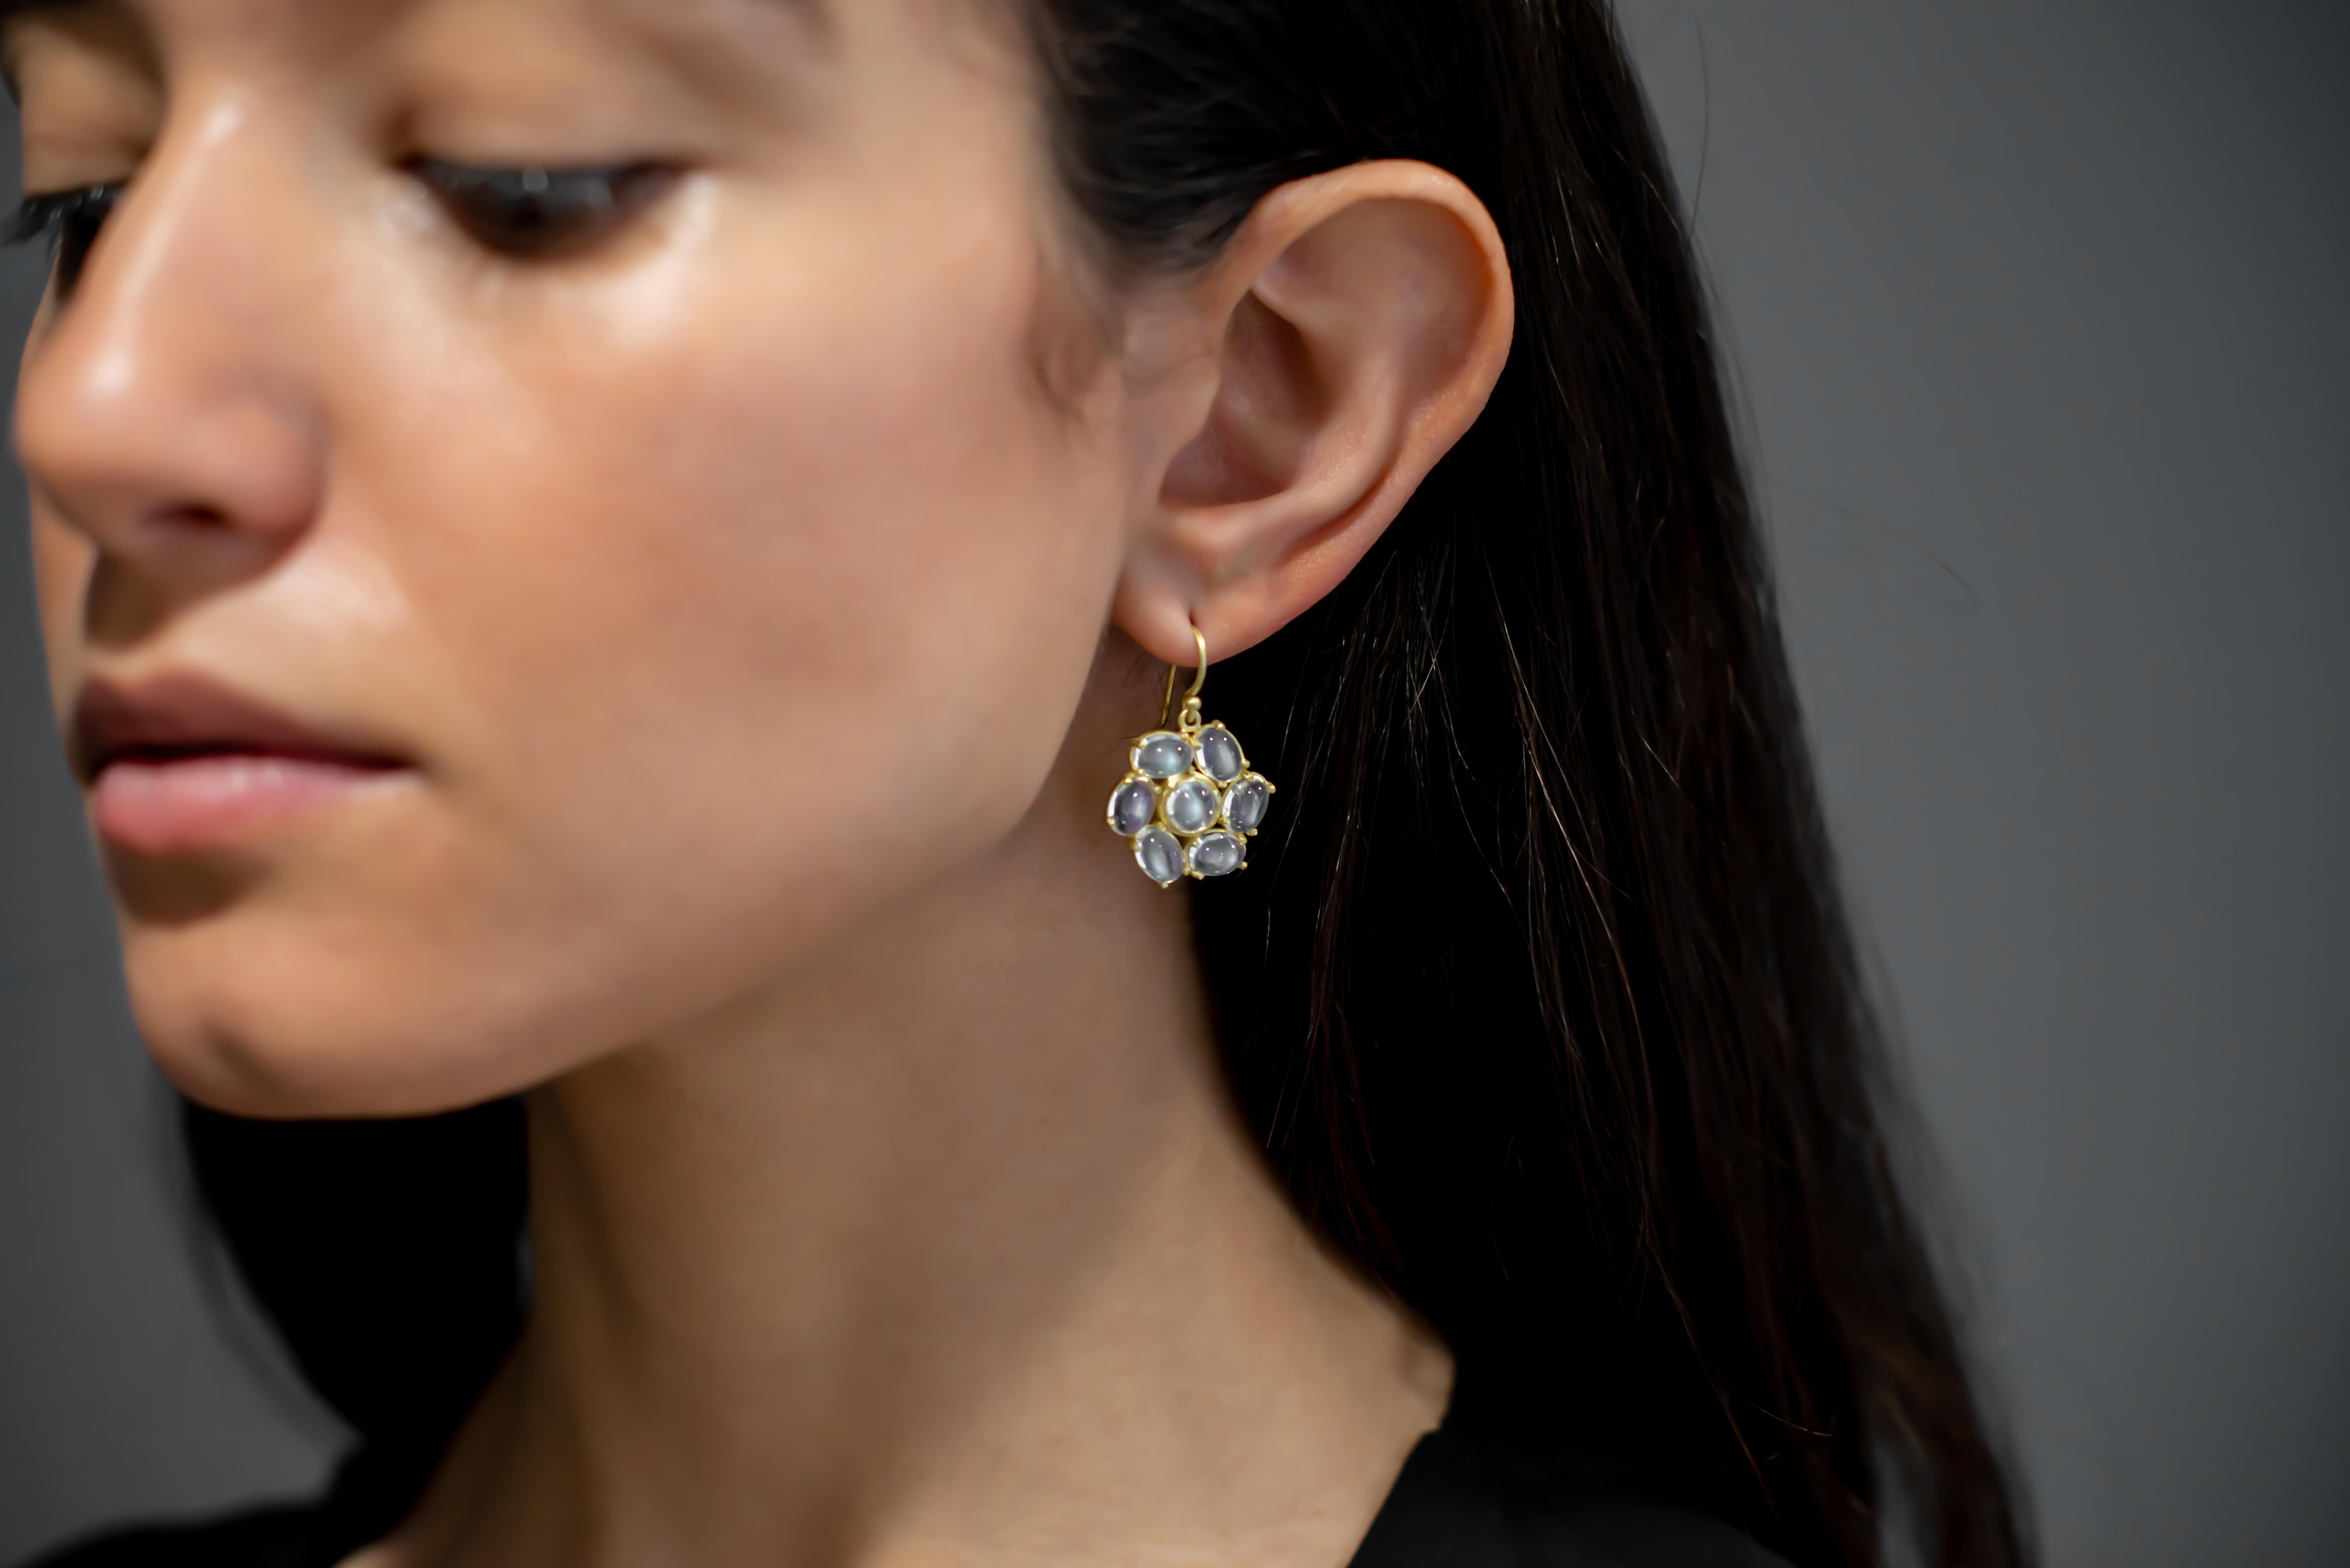 18k Gold Ceylon Moonstone Daisy Earrings.  Known for its adularescence, the blue flash from Ceylon moonstones adds to the overall mystique surrounding moonstones. In some cultures, moonstone is known as the stone of protection and considered sacred